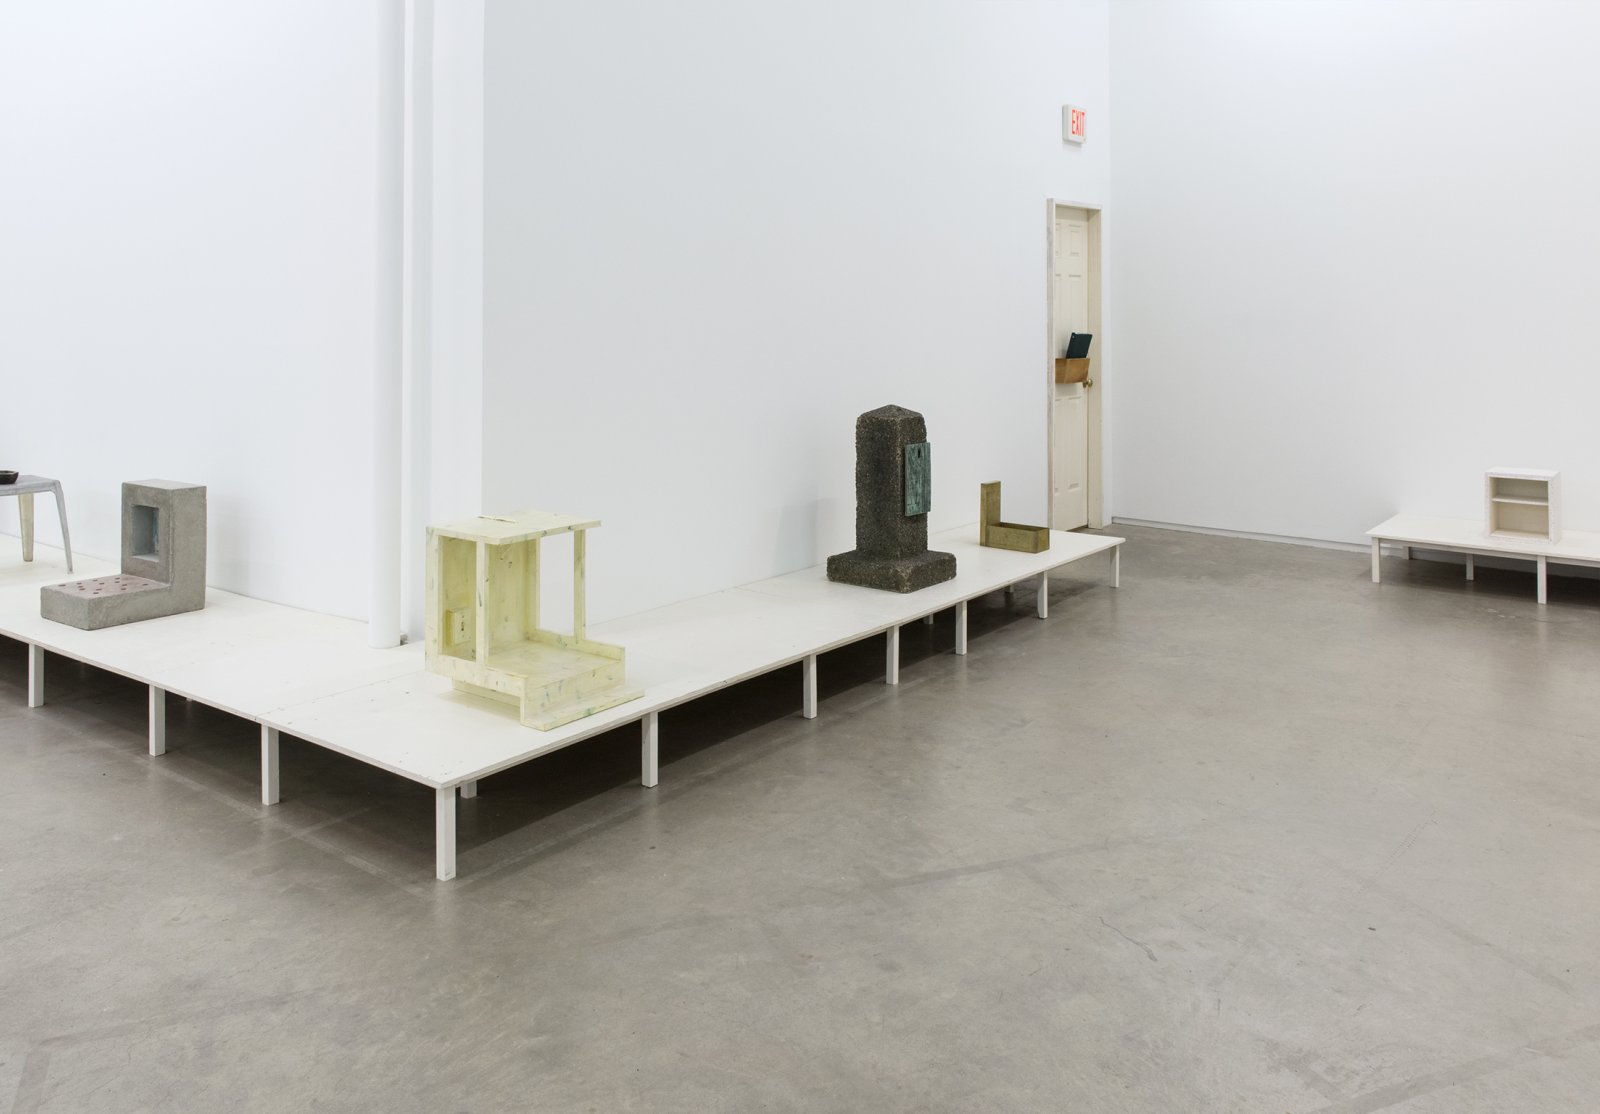 Gareth Moore, installation view, Household Temple Yard, Catriona Jeffries, 2013  by Ashes Withyman